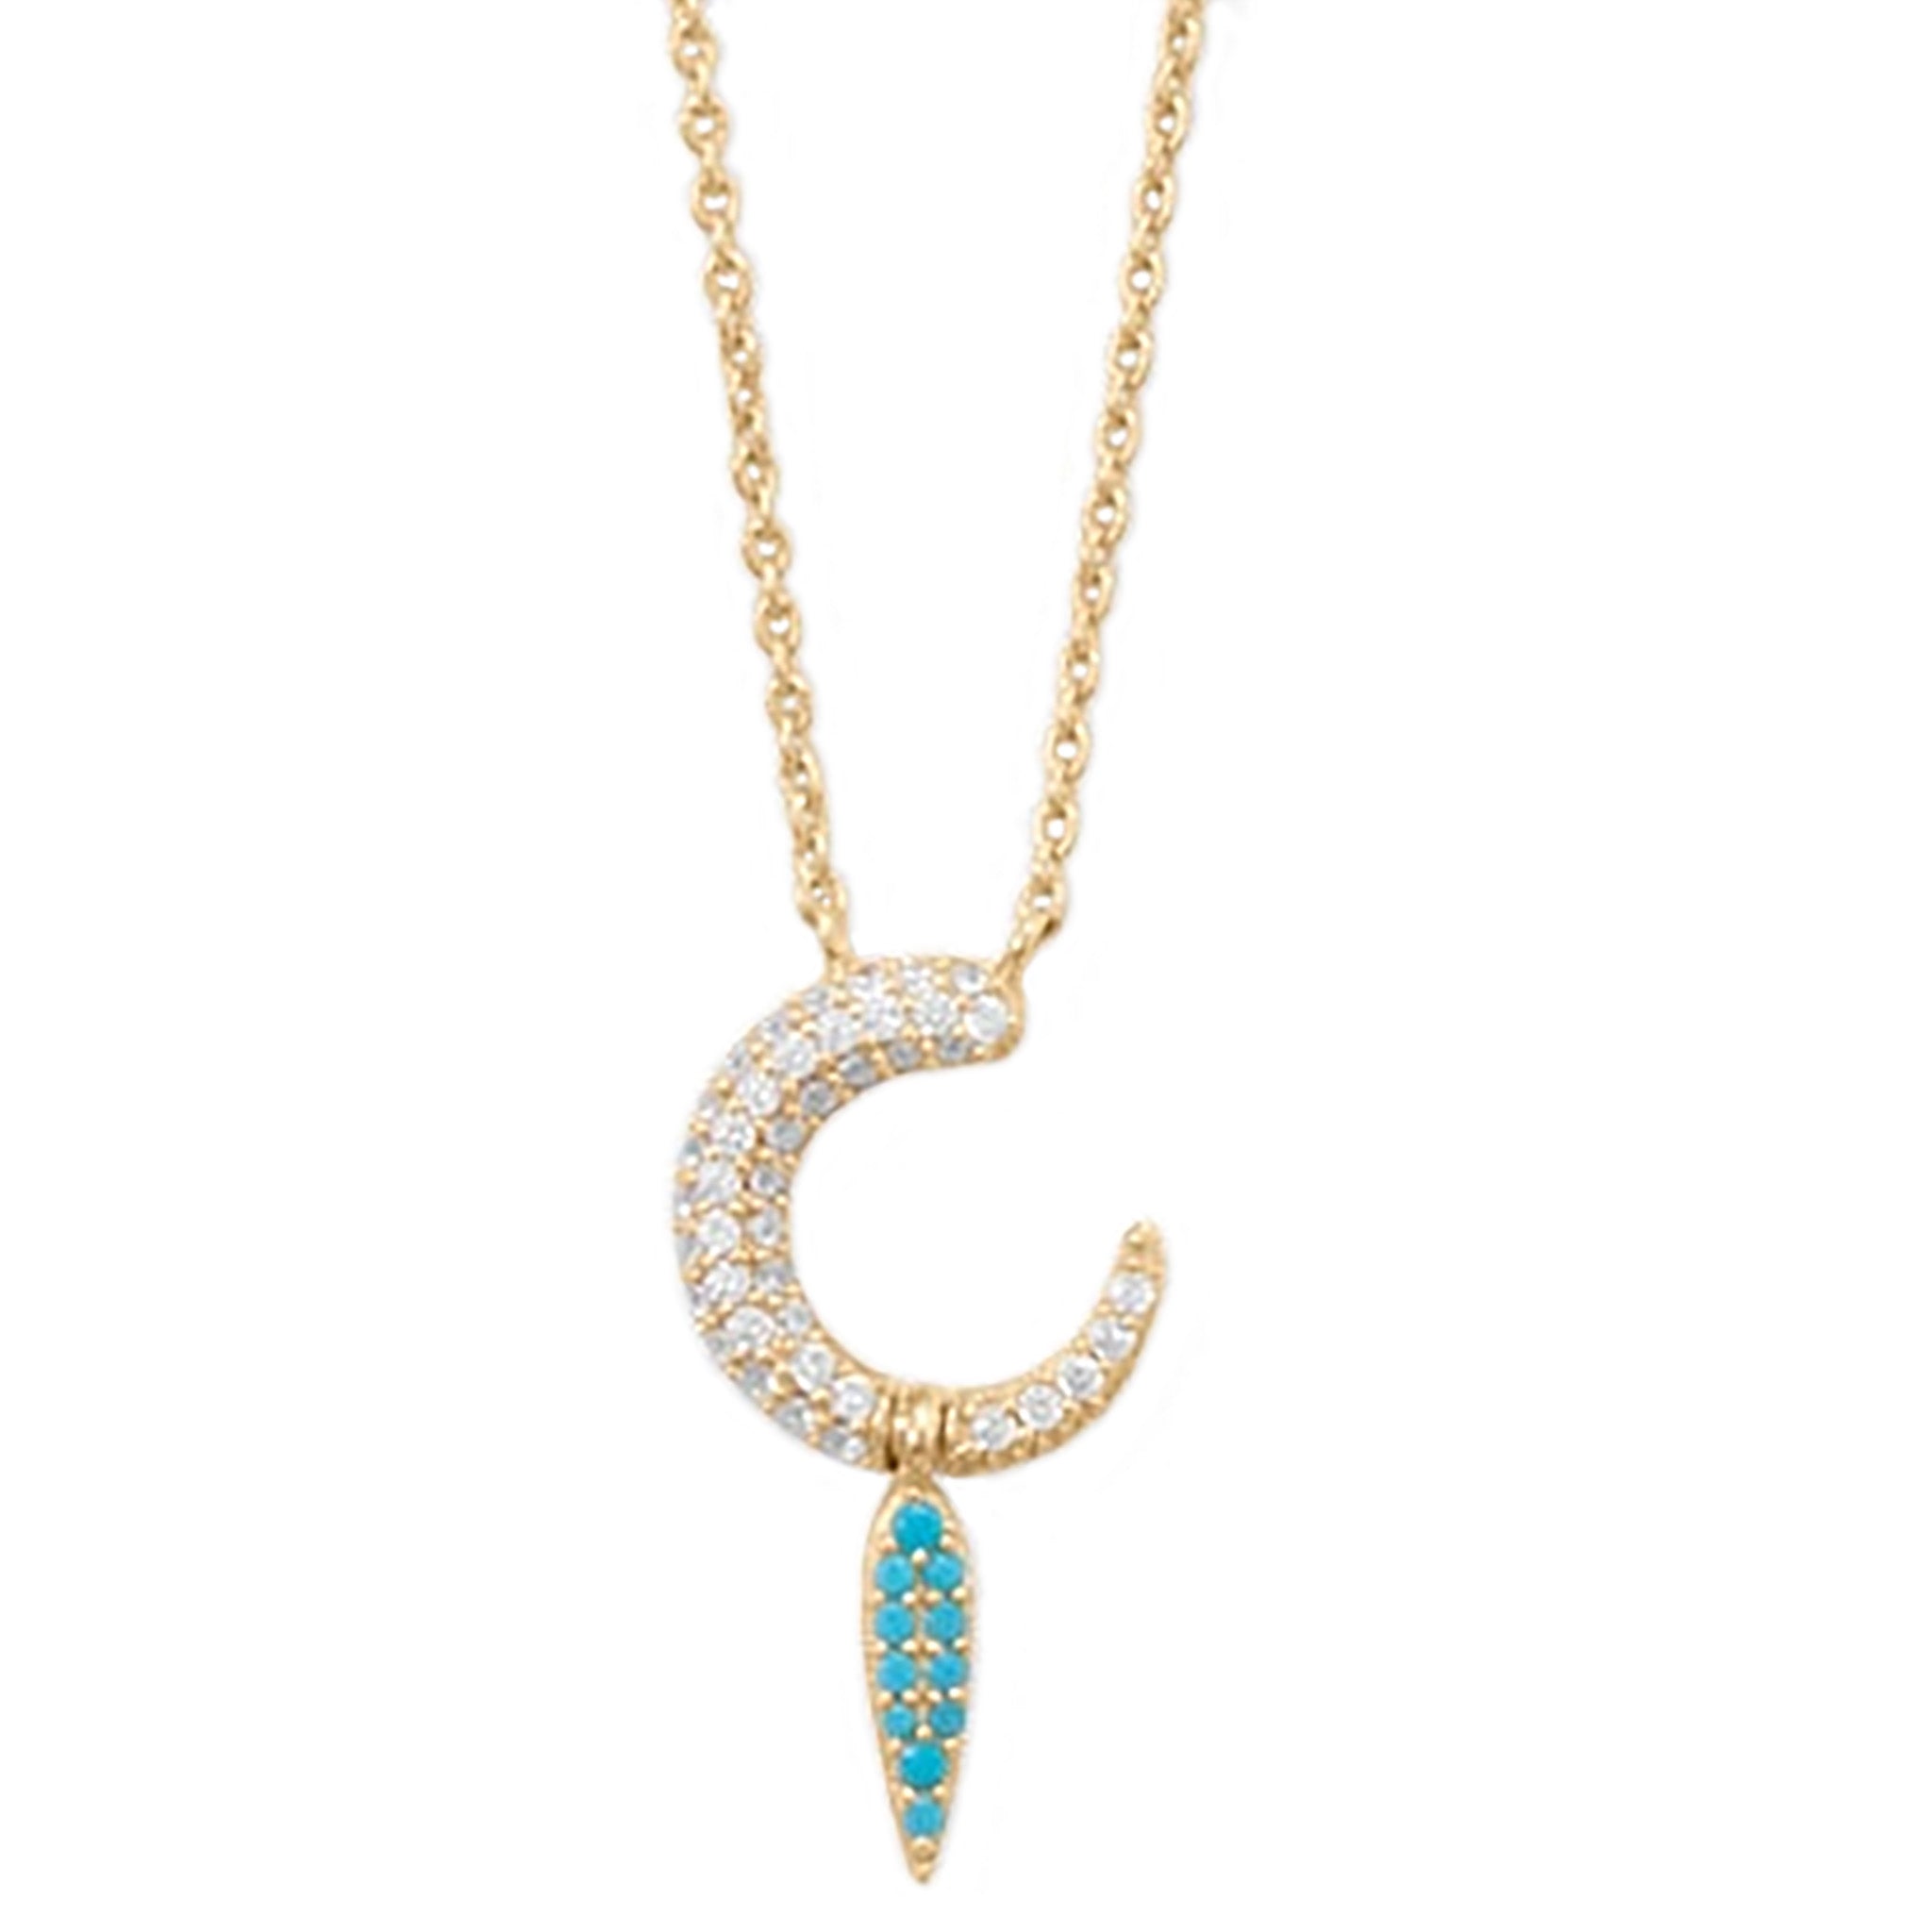 Turquoise and Zirconia Crescent Necklace